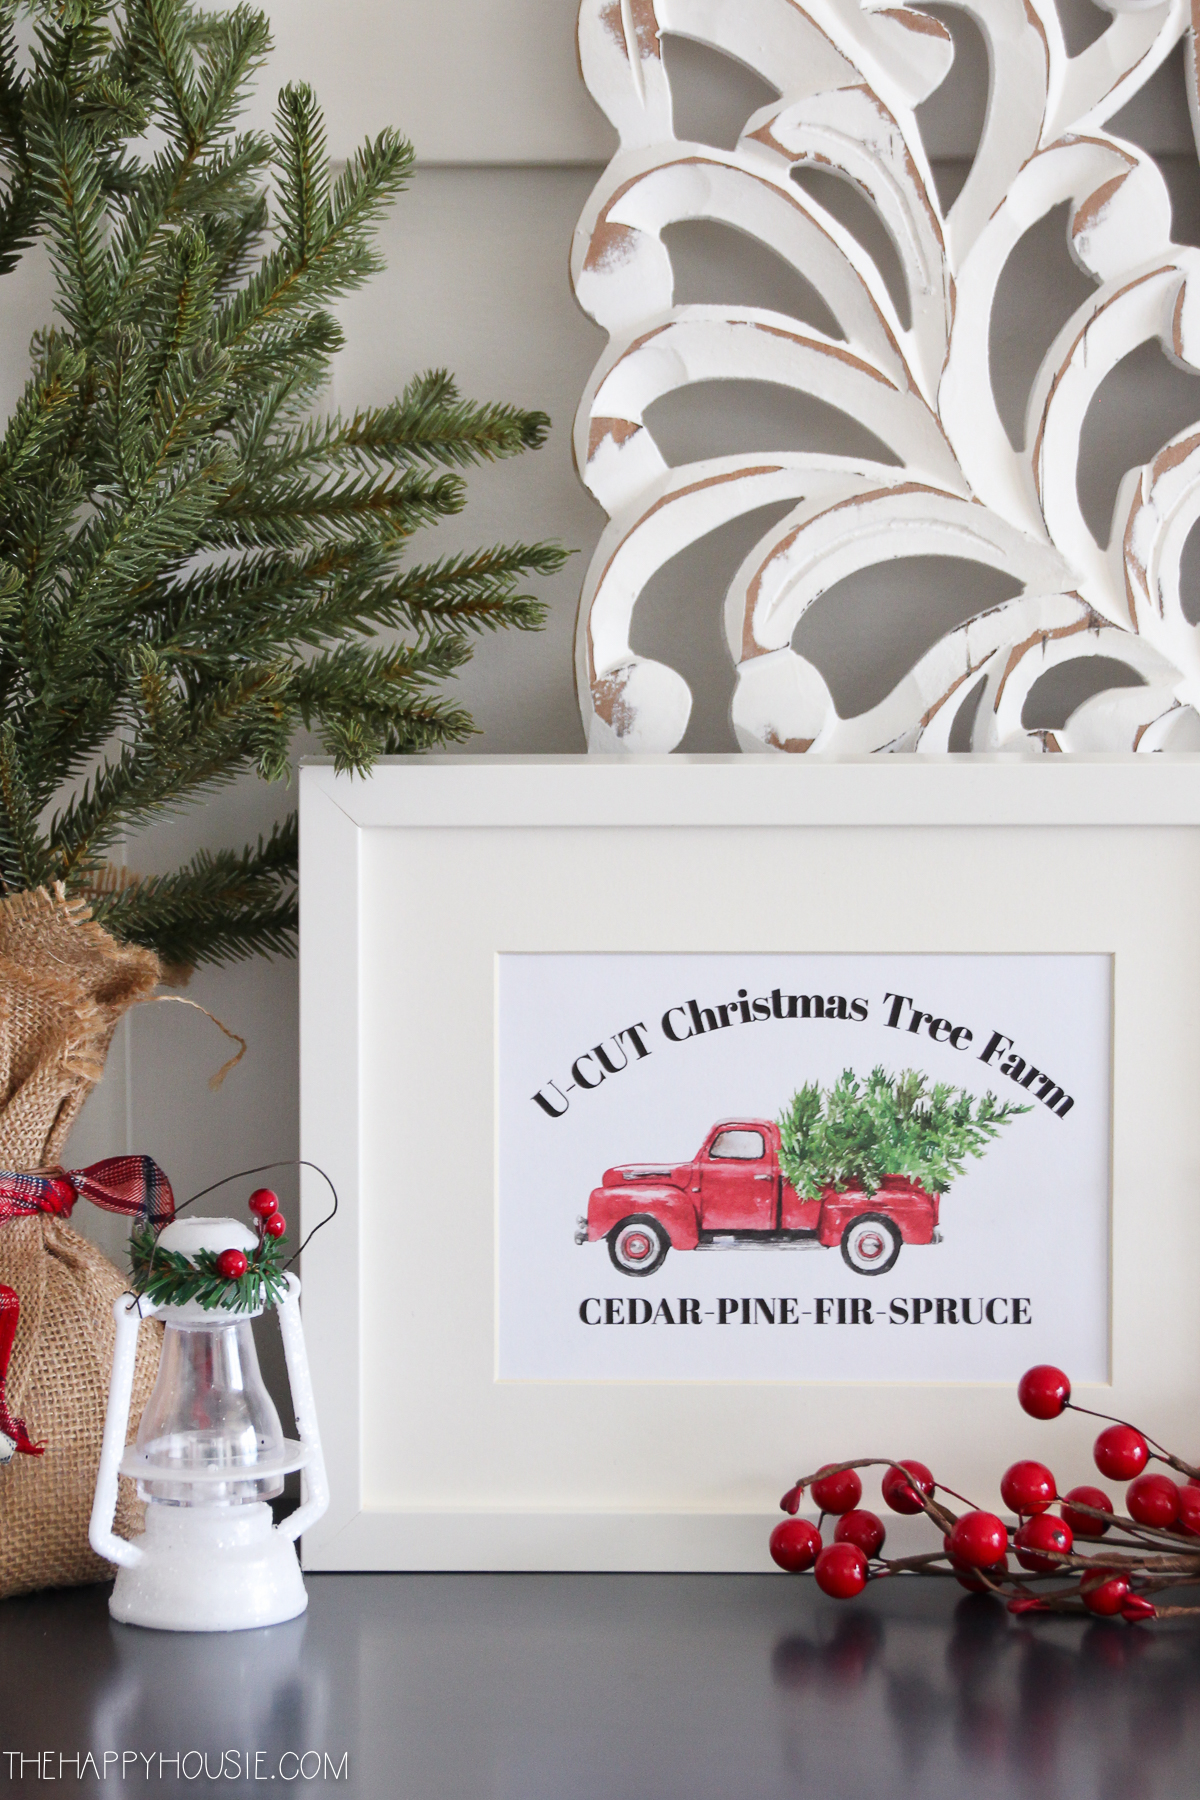 A framed picture of a red truck carrying a Christmas tree